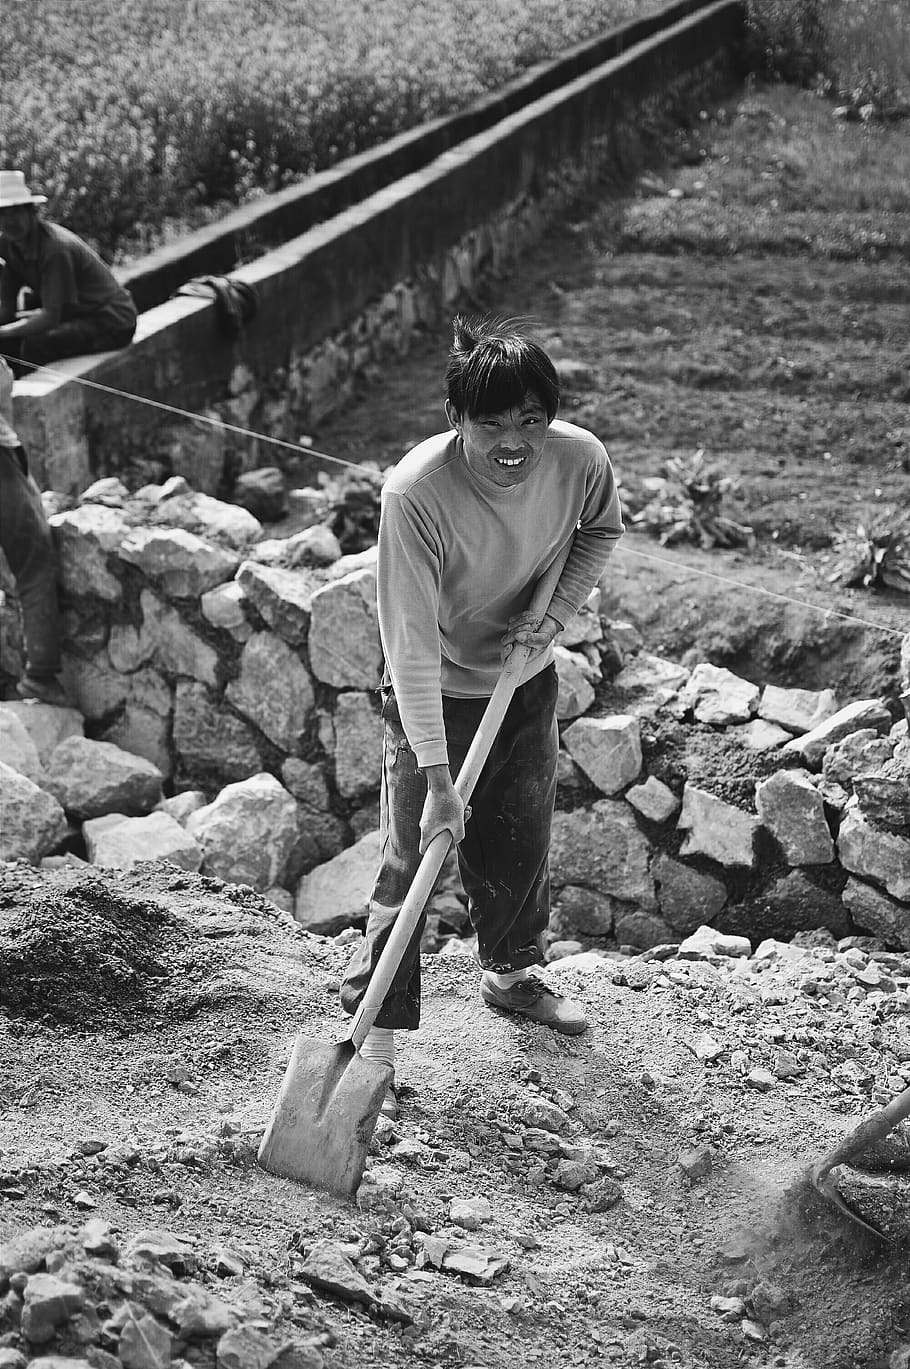 grayscale photo of man holding shovel, tool, human, person, rubble